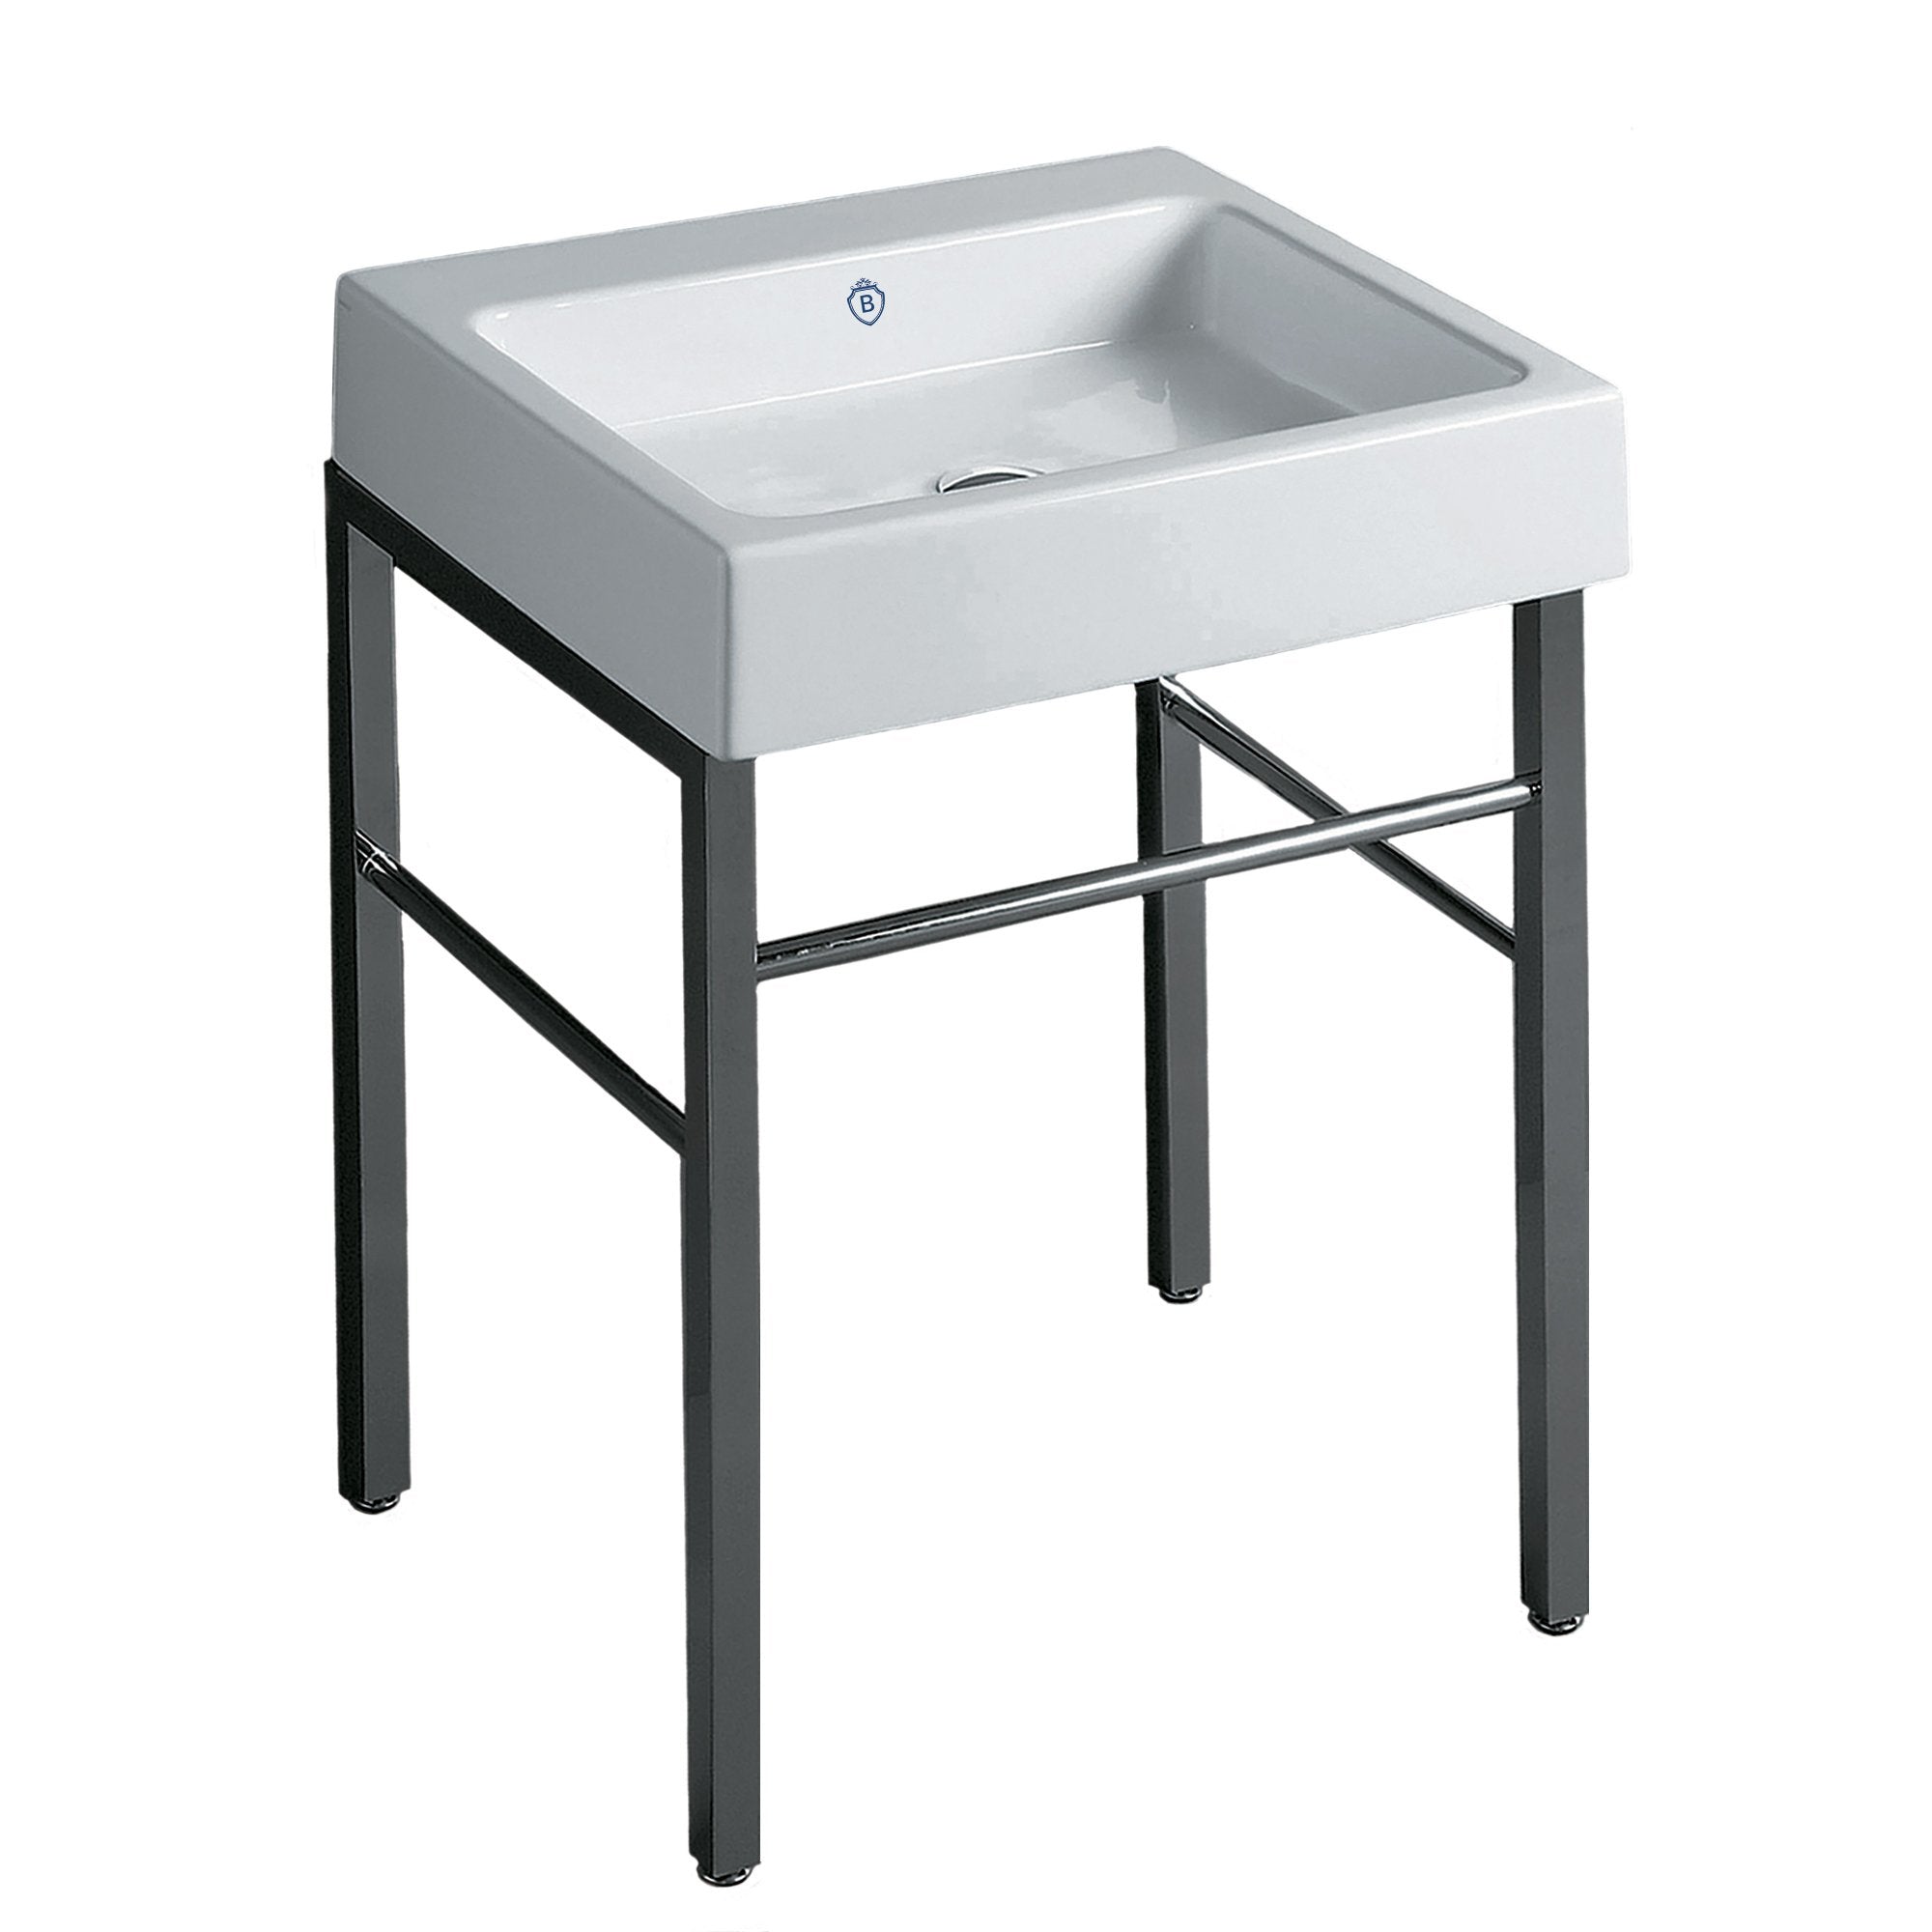 Console Sinks - Whitehaus Collection